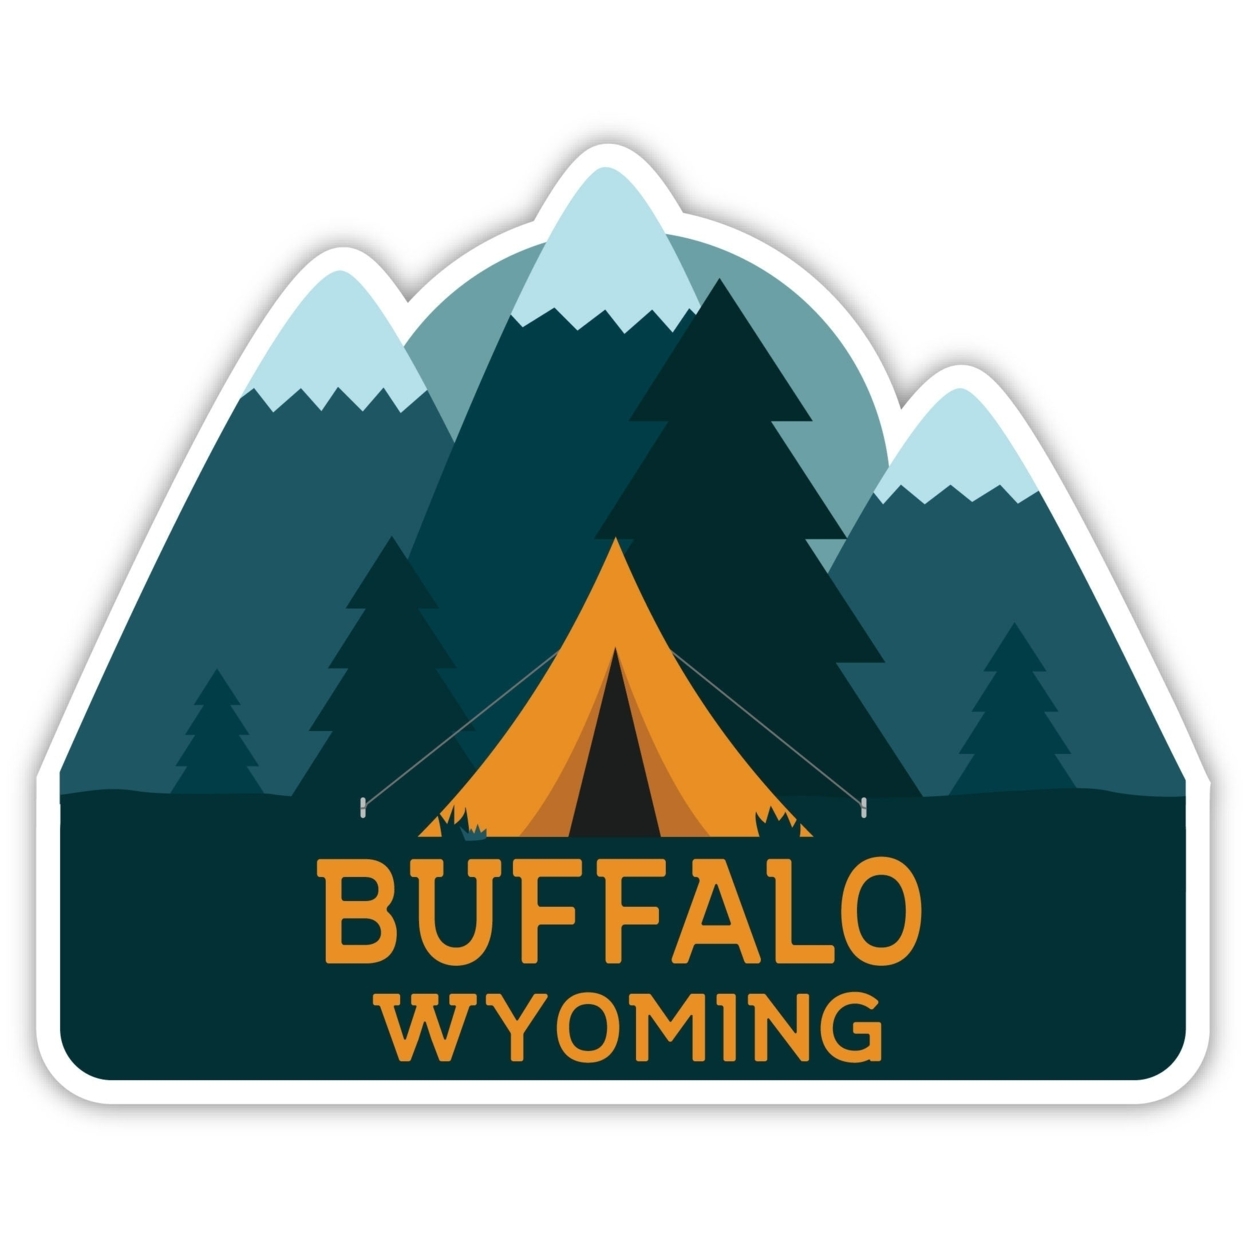 Buffalo Wyoming Souvenir Decorative Stickers (Choose Theme And Size) - Single Unit, 10-Inch, Camp Life